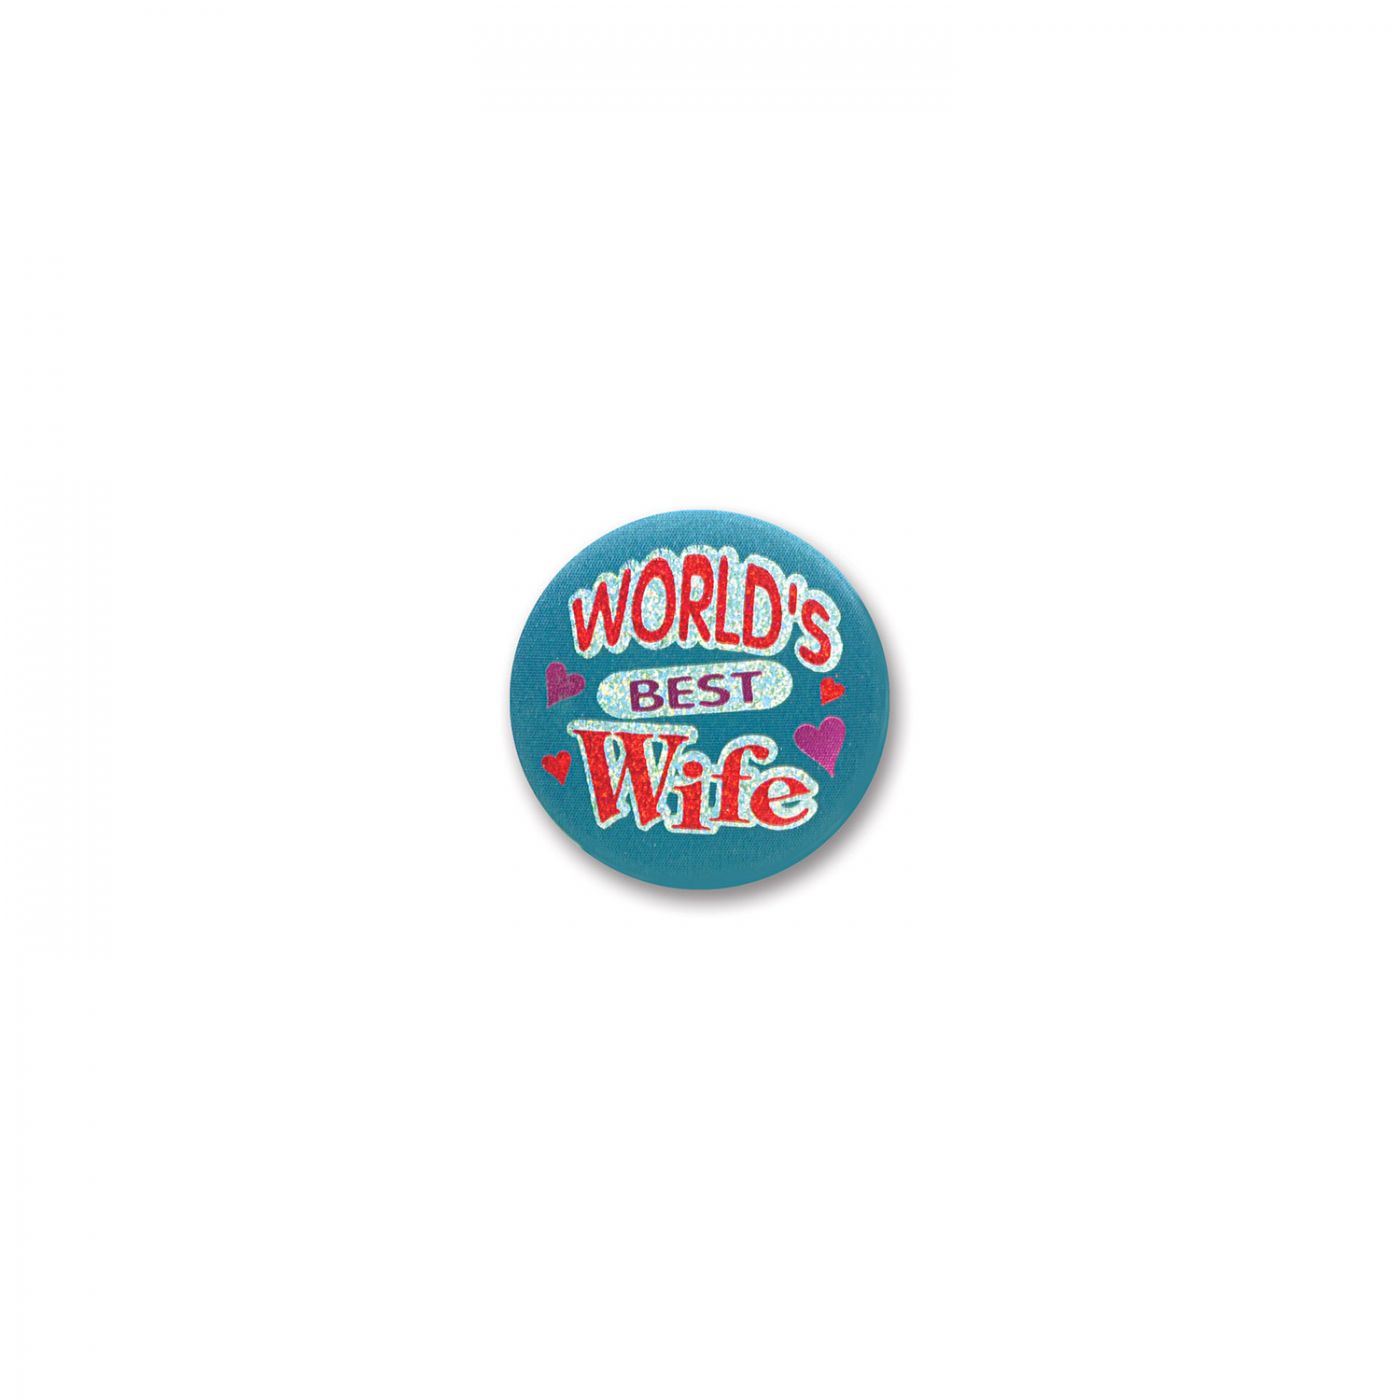 World's Best Wife Satin Button (6) image